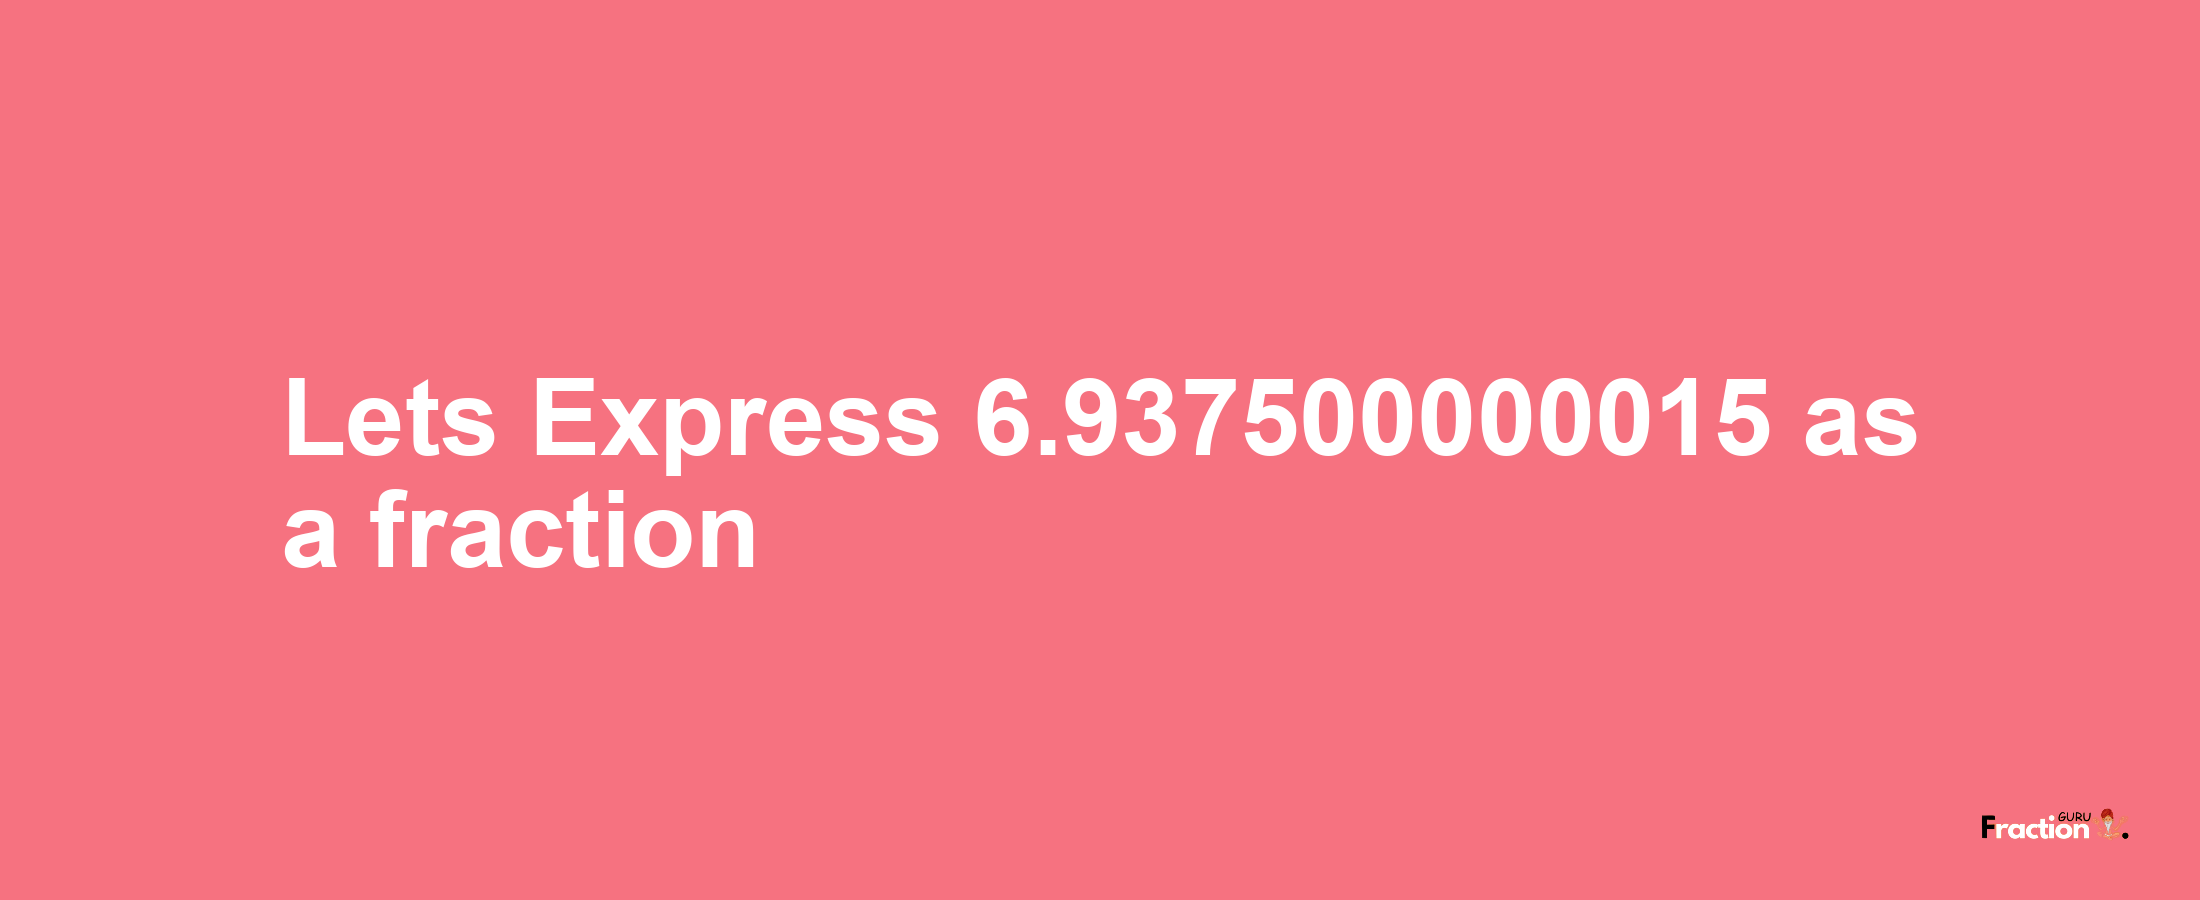 Lets Express 6.937500000015 as afraction